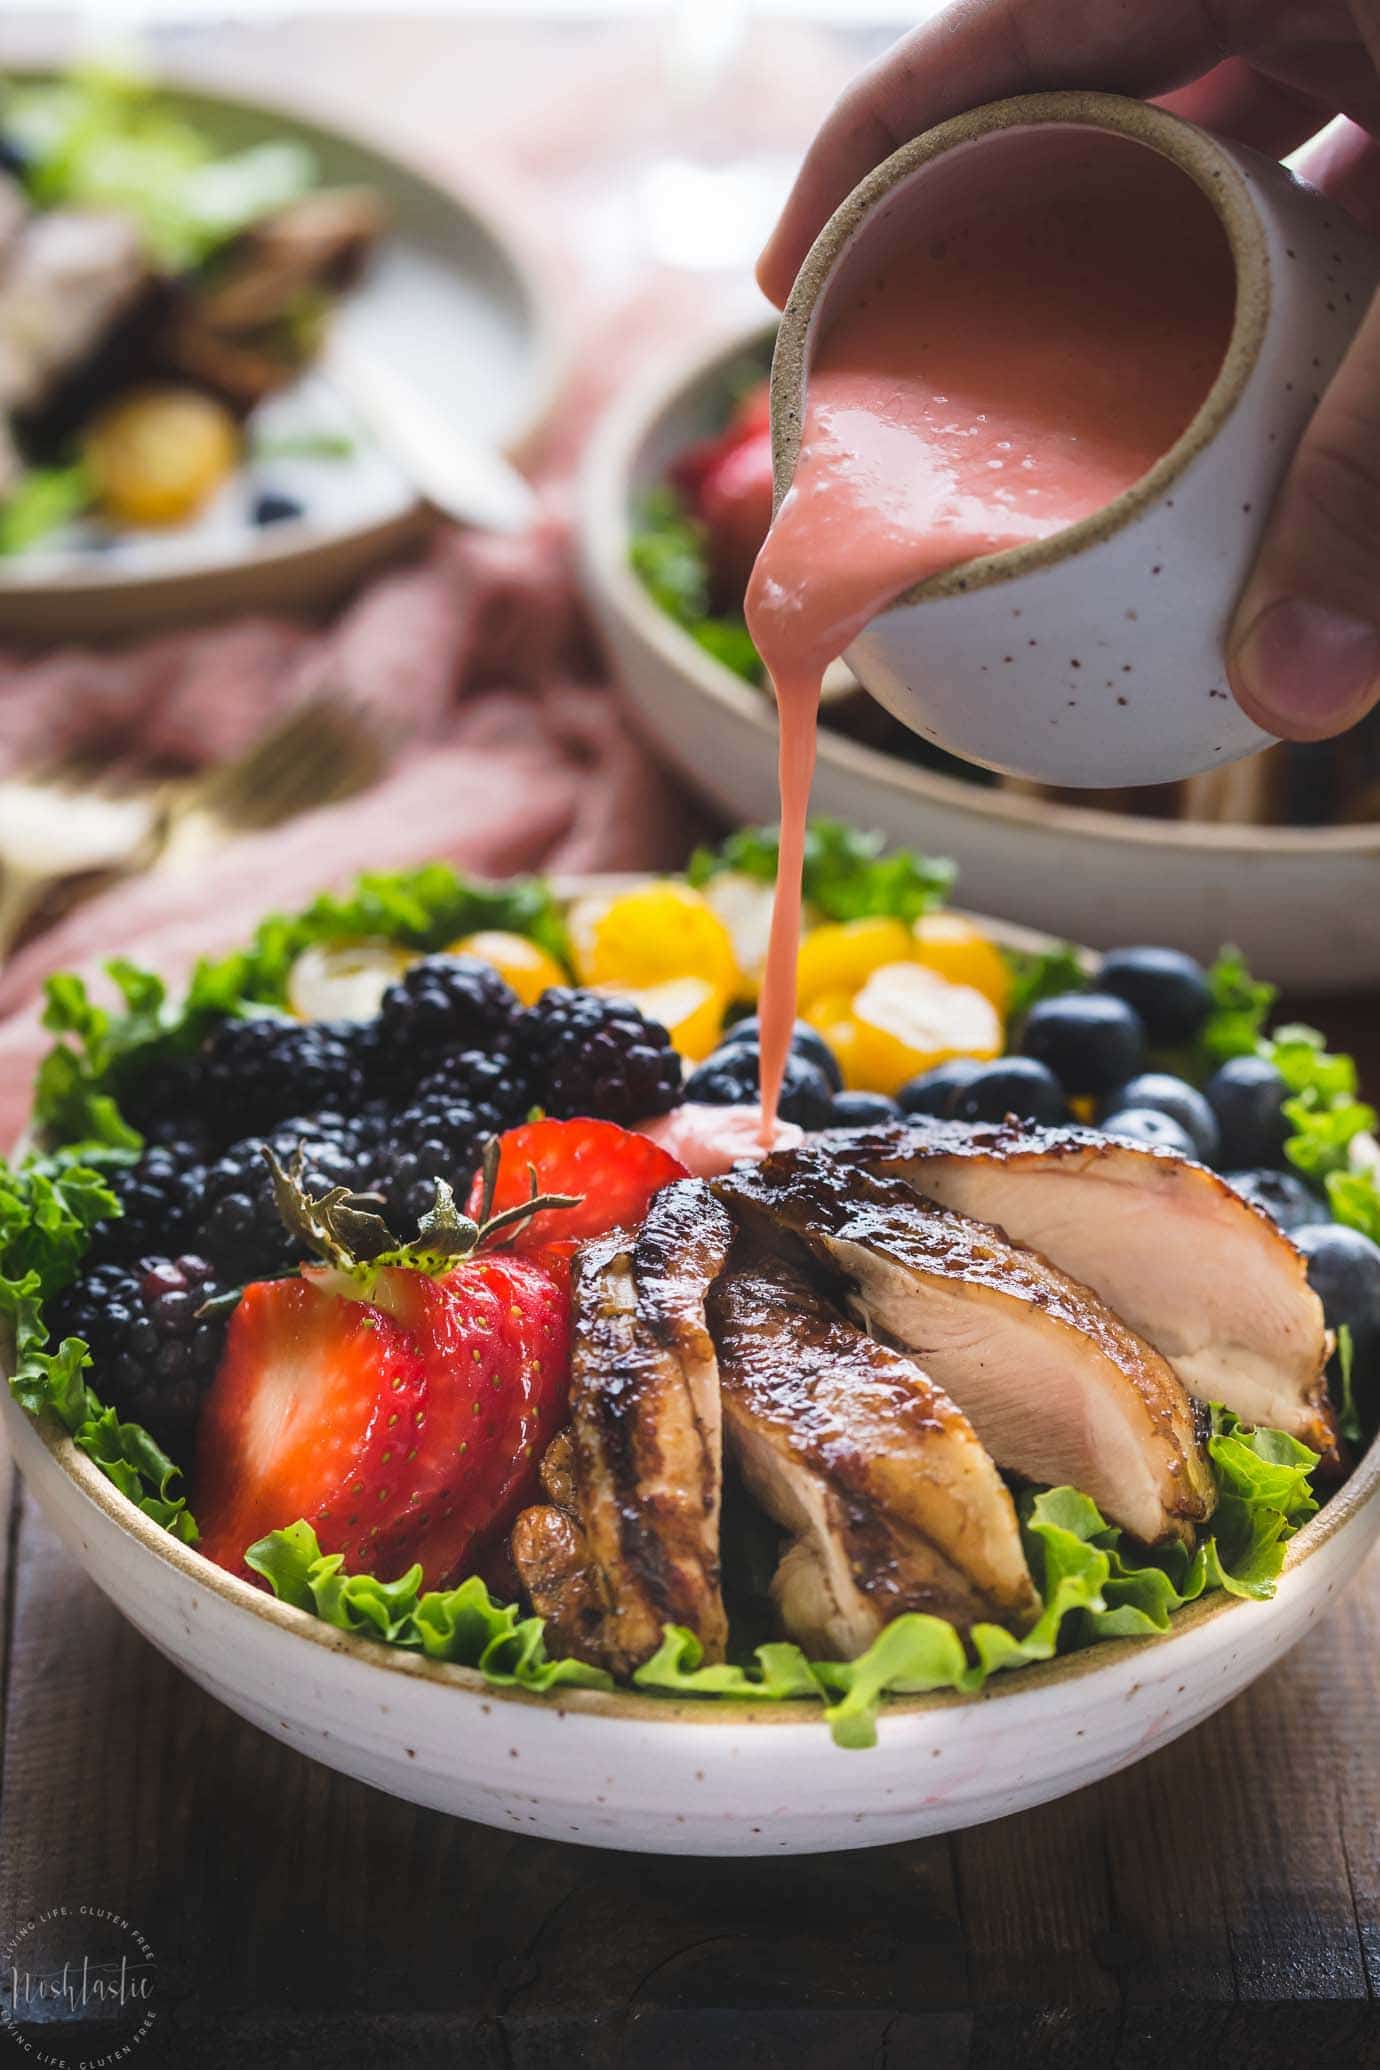 My Paleo Balsamic Chicken Salad is made with skinless chicken thighs marinated in balsamic vinegar, garlic, Dijon mustard and cooked to perfection on the grill before being served over a bed of lettuce with delicious Summer fruits and topped with a Creamy Dairy Free Strawberry Vinaigrette!